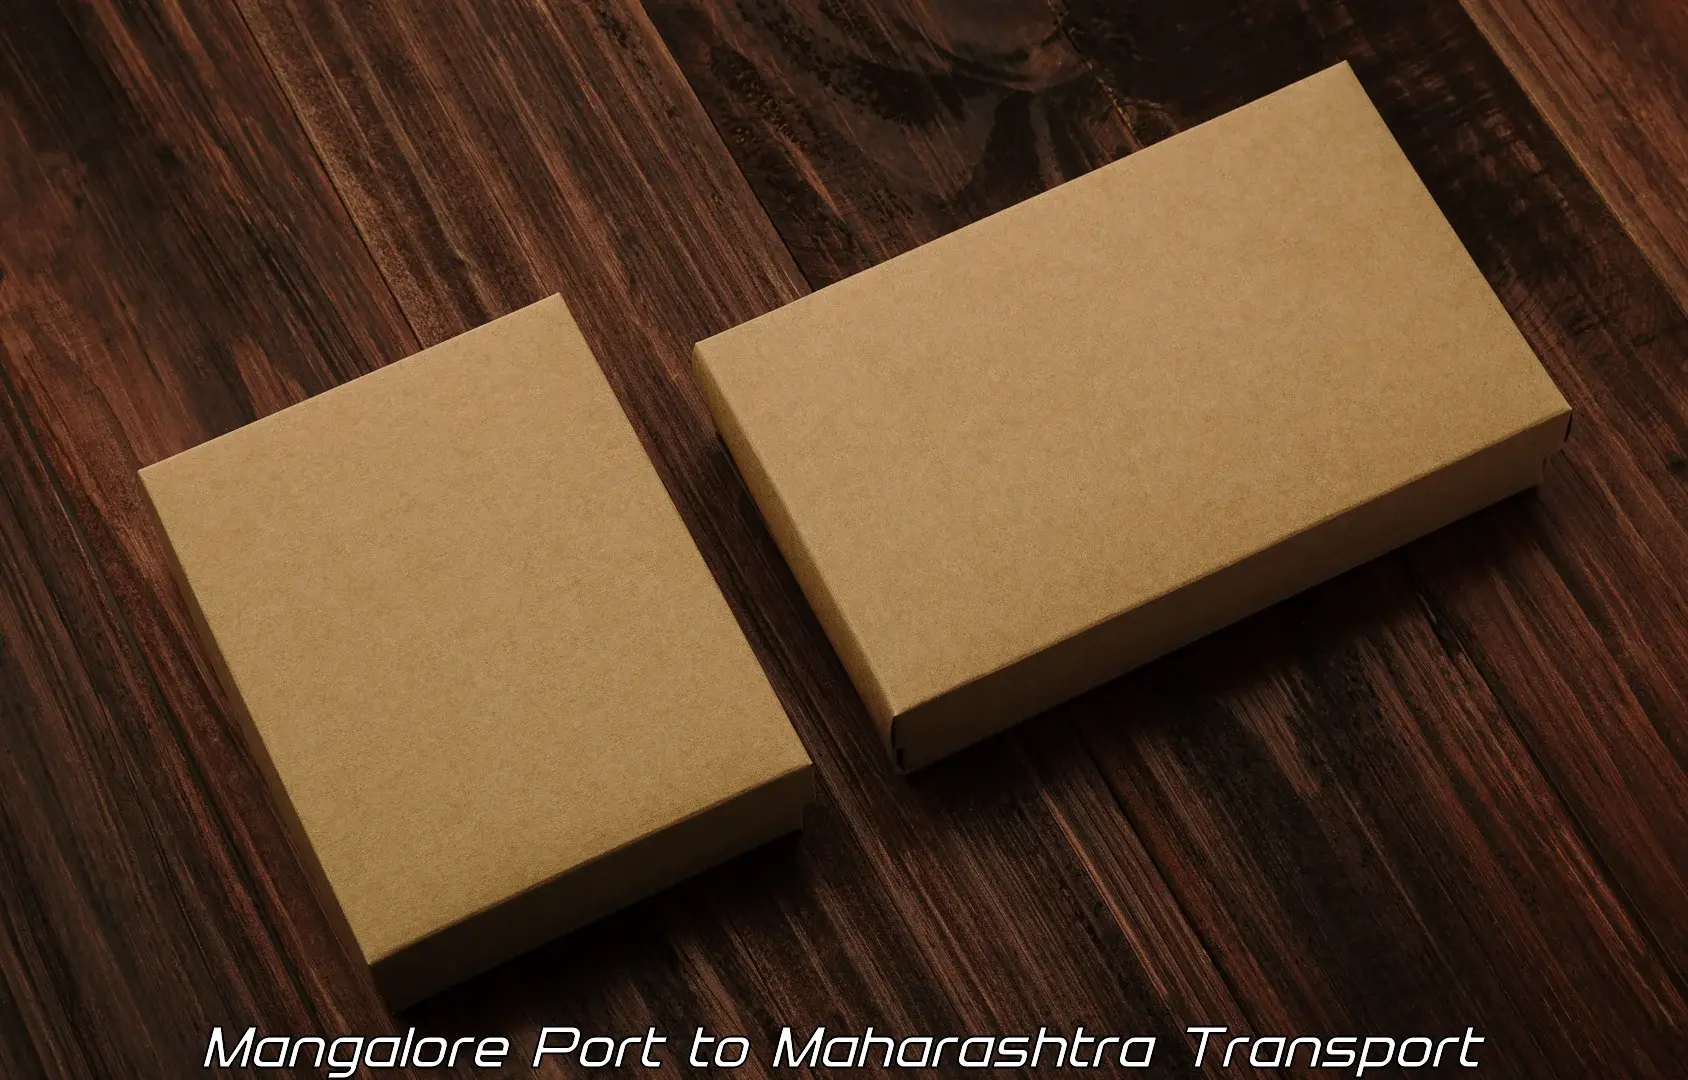 Cargo transport services in Mangalore Port to Thane